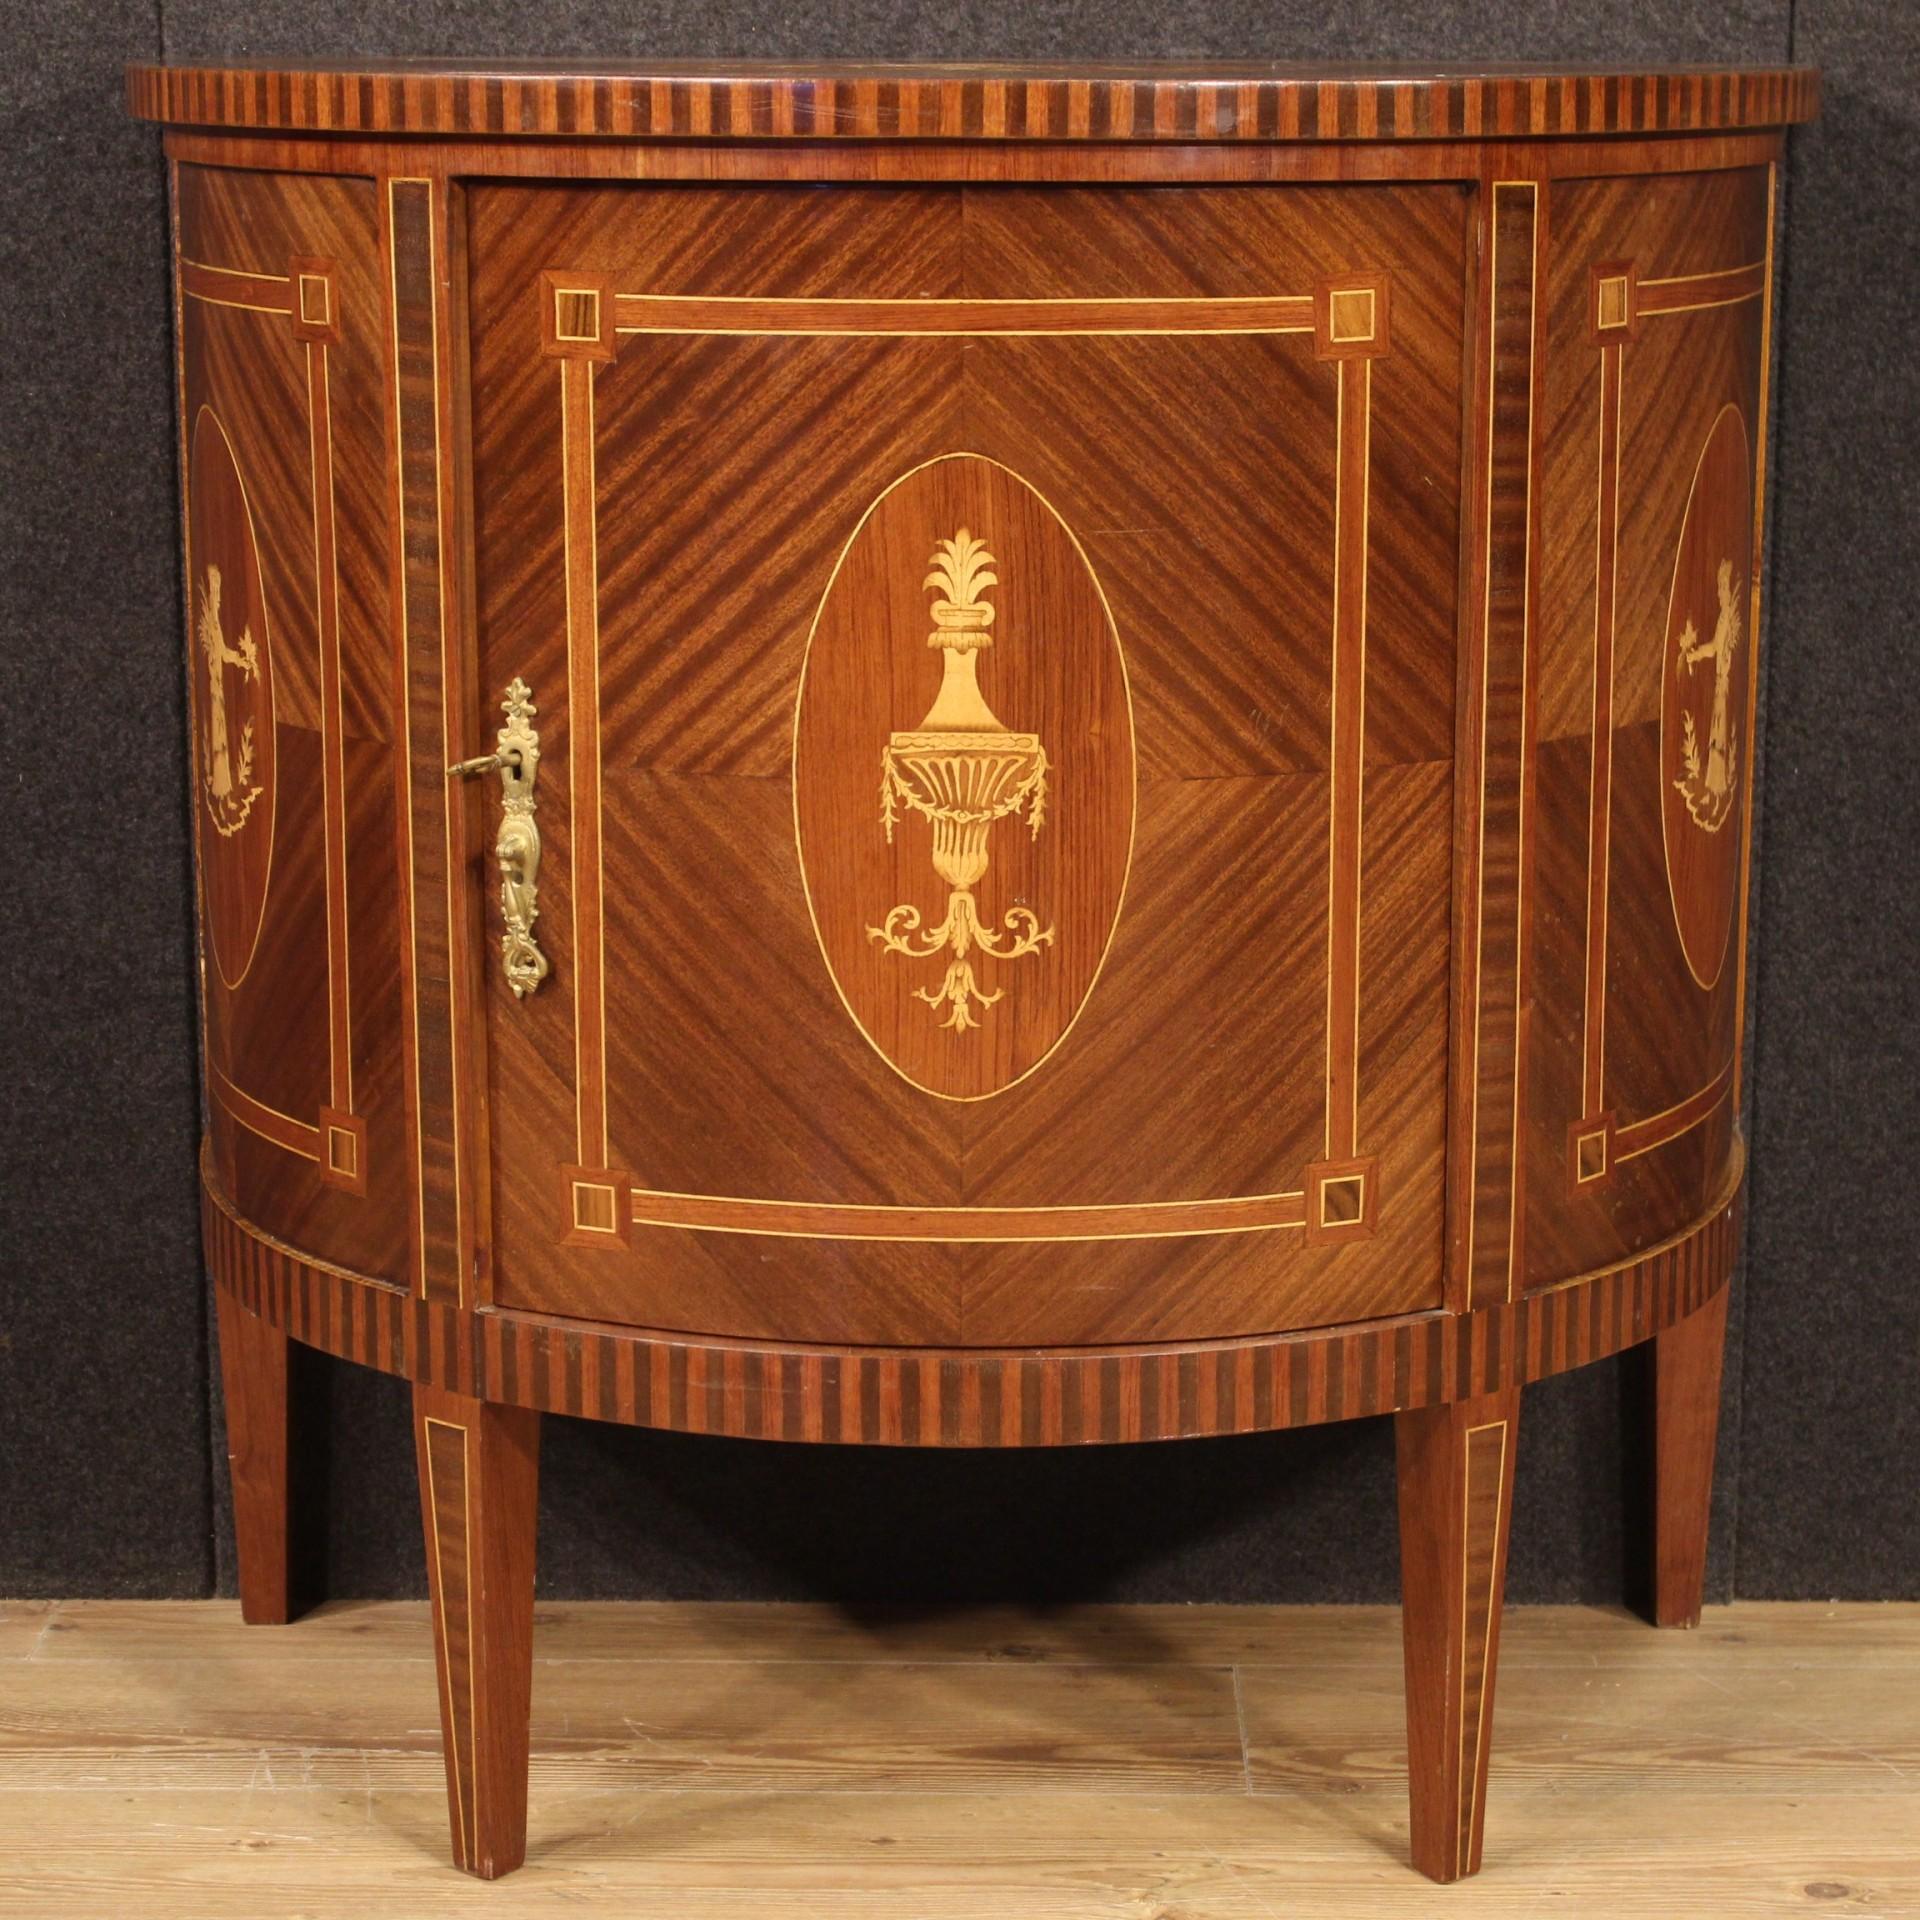 Sideboard a crescent moon Italian of the 20th century. Mobile inlaid in woods of mahogany, walnut, maple, bois de rose and fruit woods in style Louis XVI. One sideboard door complete with working key equipped with a flatter internal shelf a